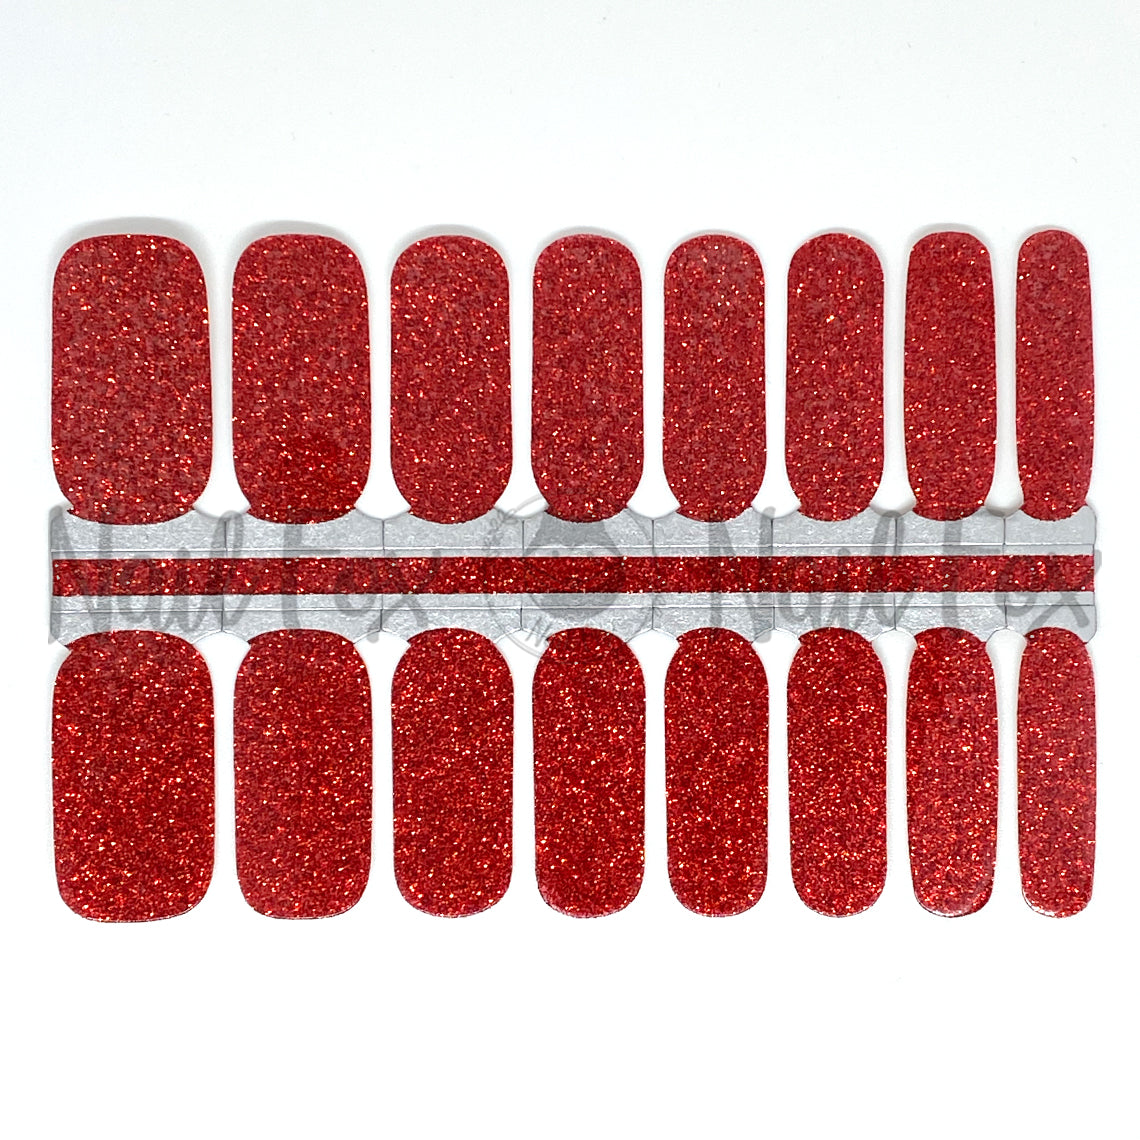 Red Glitter Nail Wraps